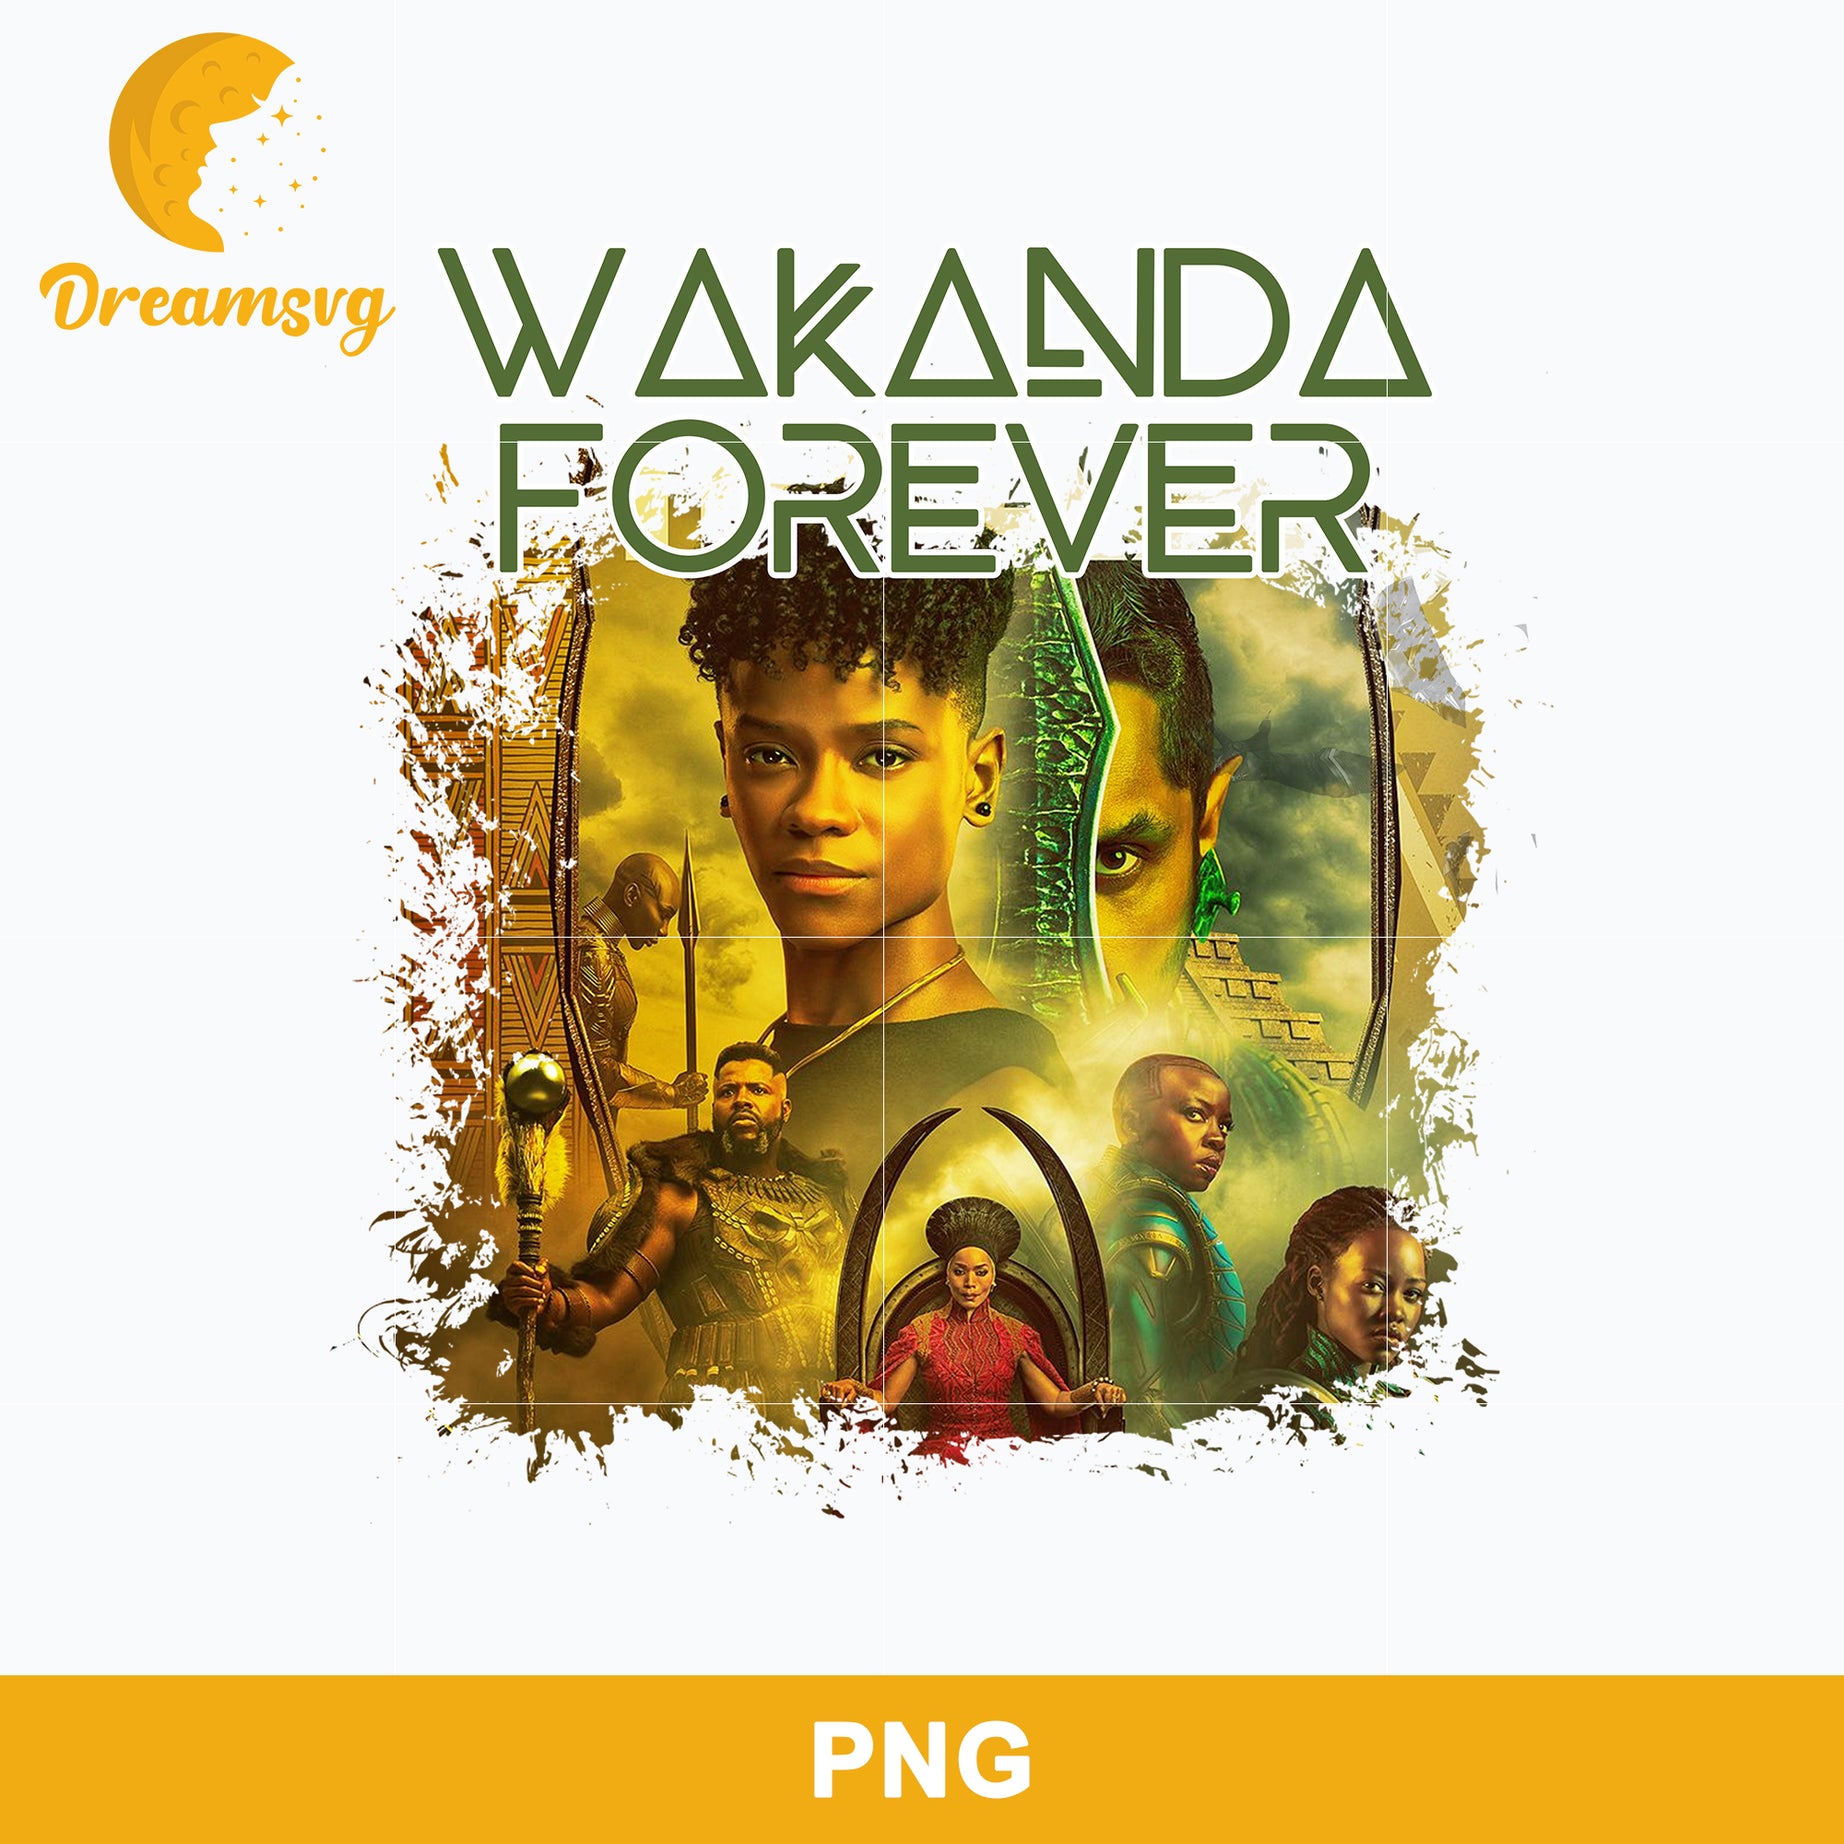 Wakanda Forever Black Panther PNG, Wakanda Forever PNG, Marvel PNG.